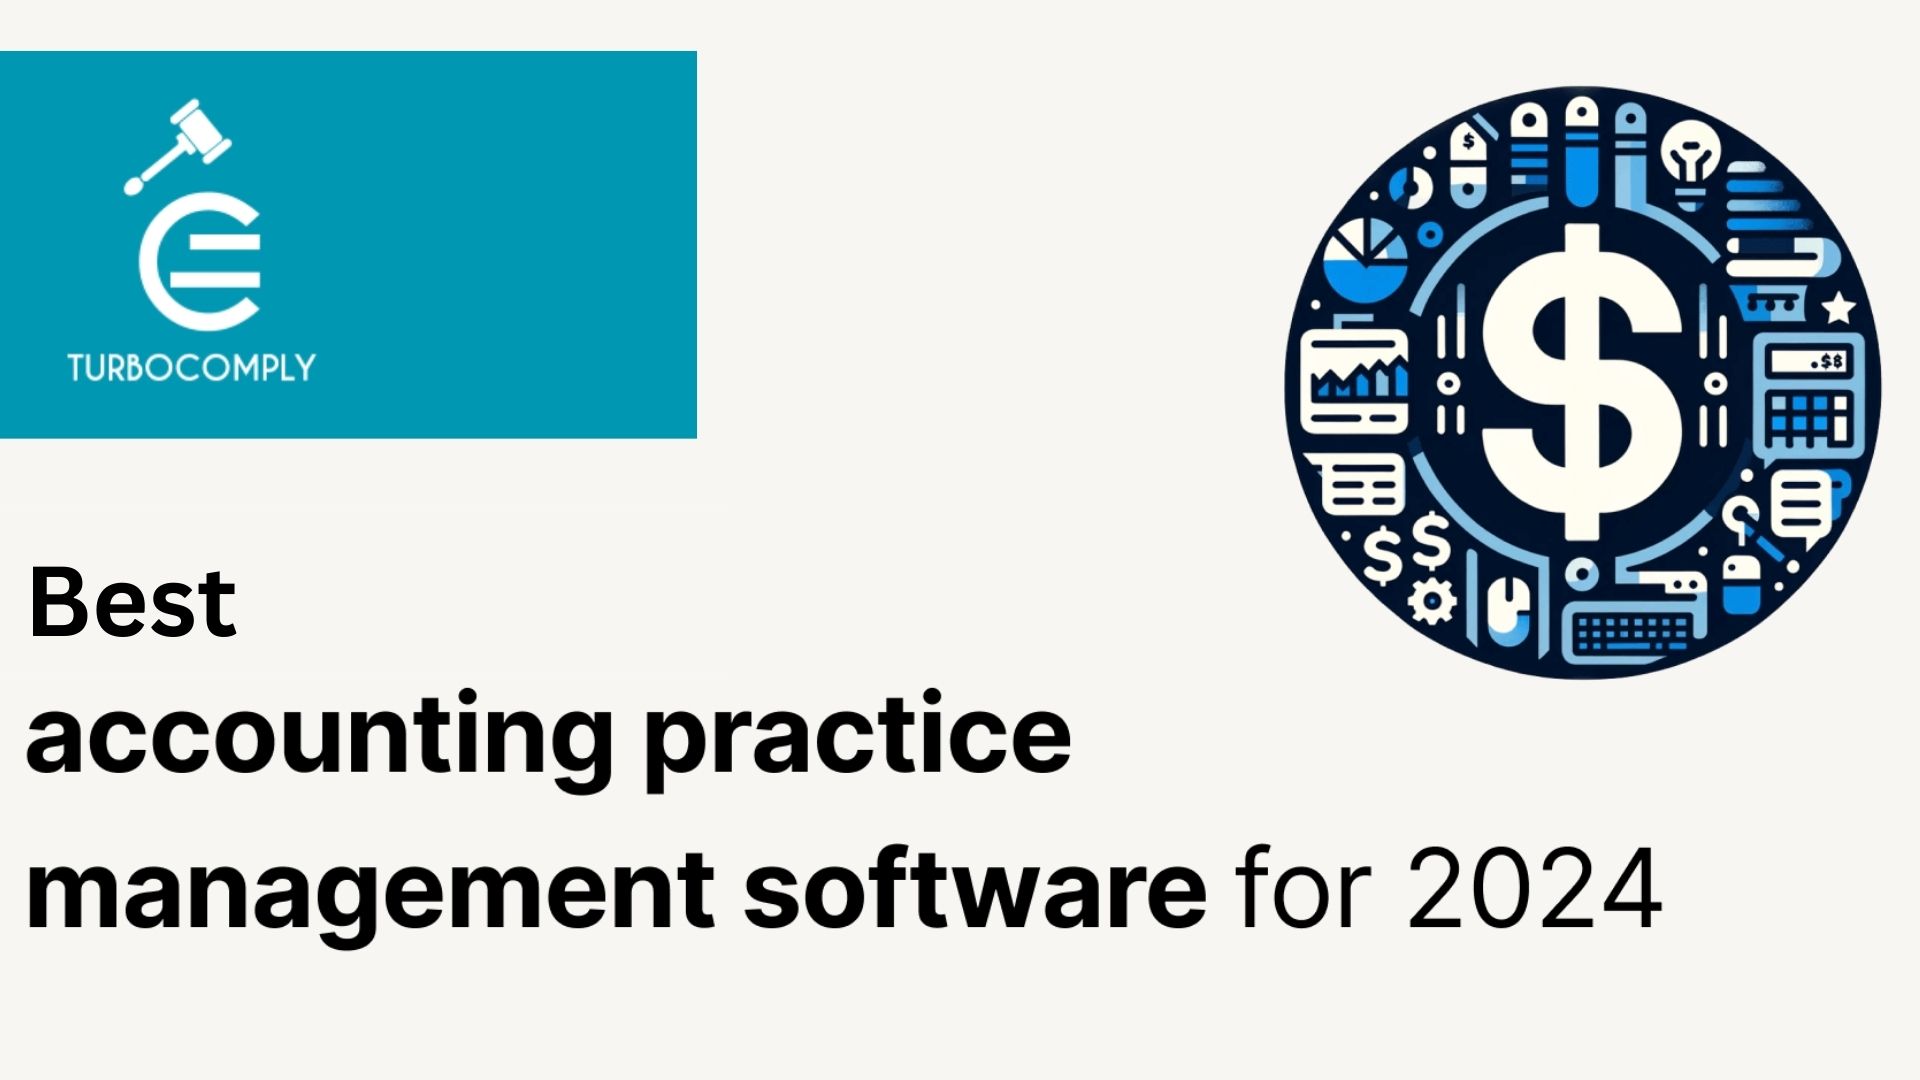 Global Top Accounting Practice Management Softwares of 2024